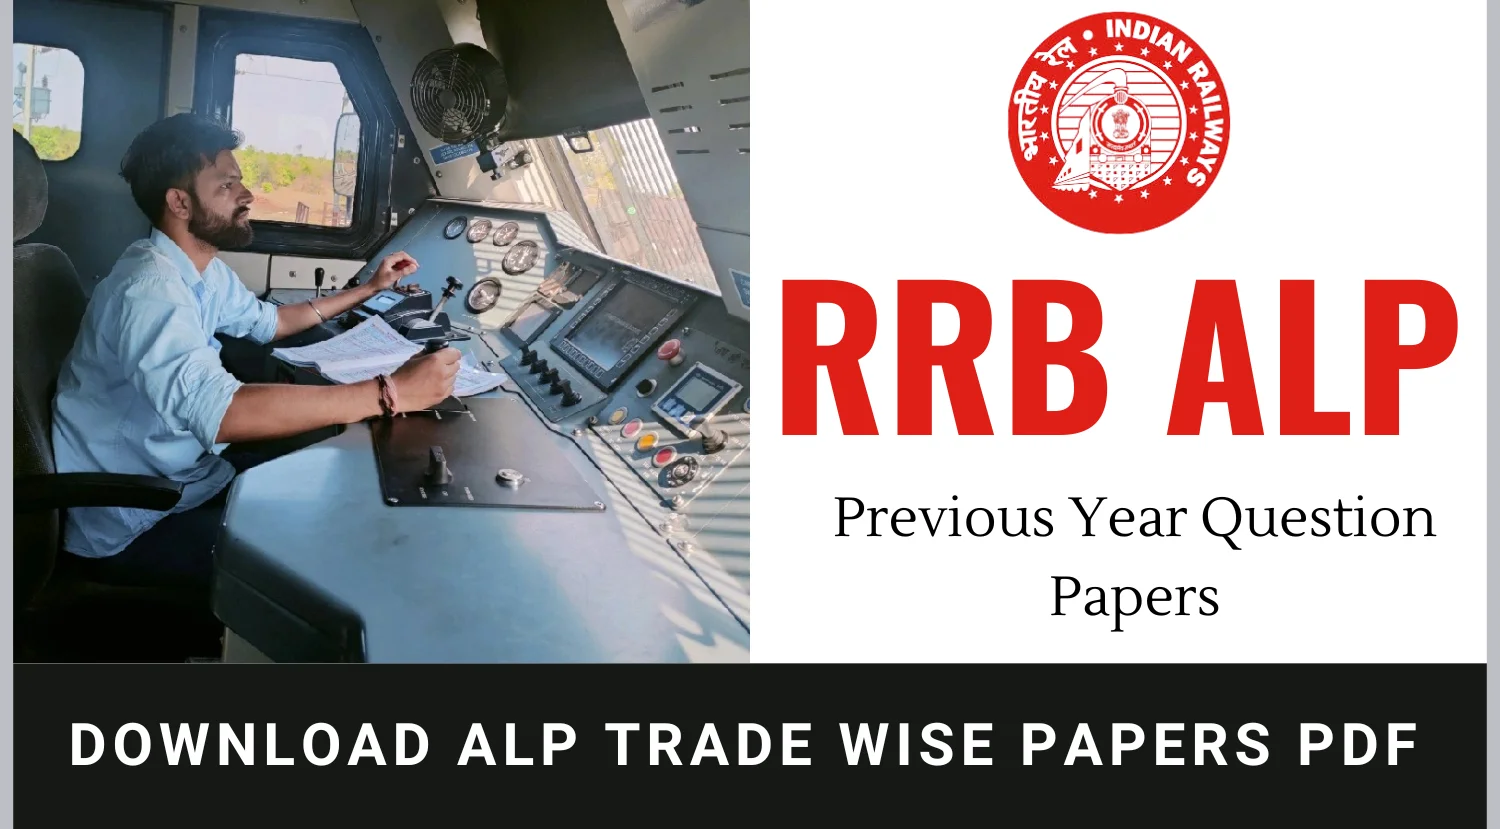 RRB ALP Previous Year Question Papers - Download ALP Trade Wise Papers PDF